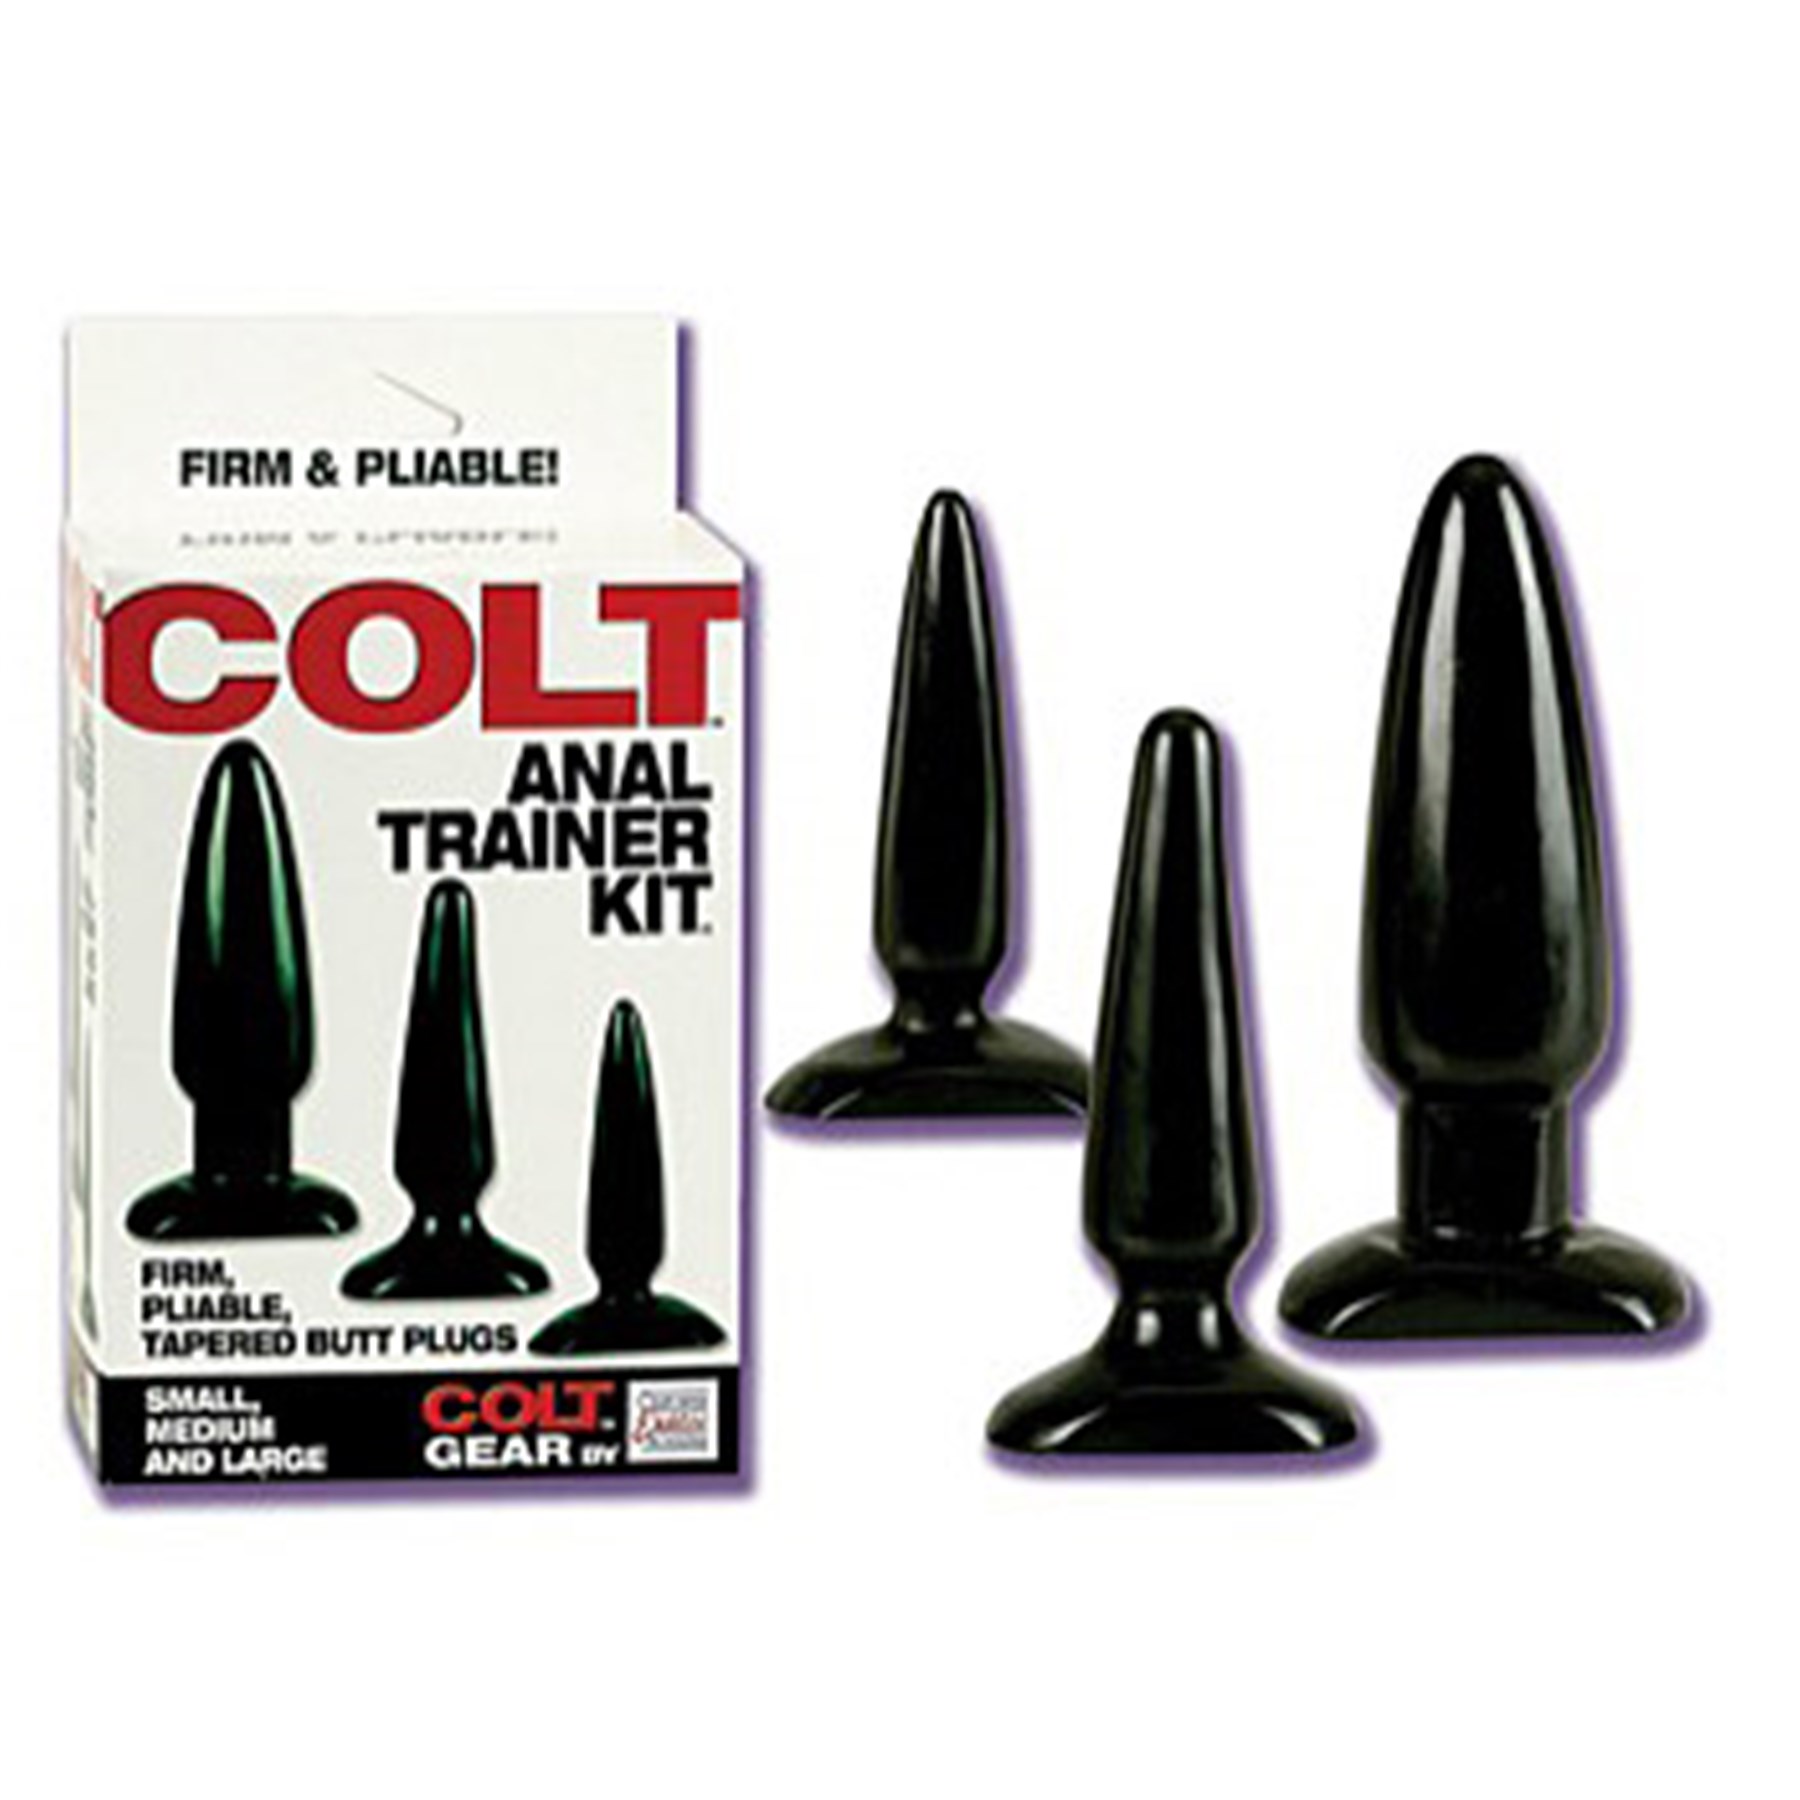 colt-anal-trainer-kit packaging